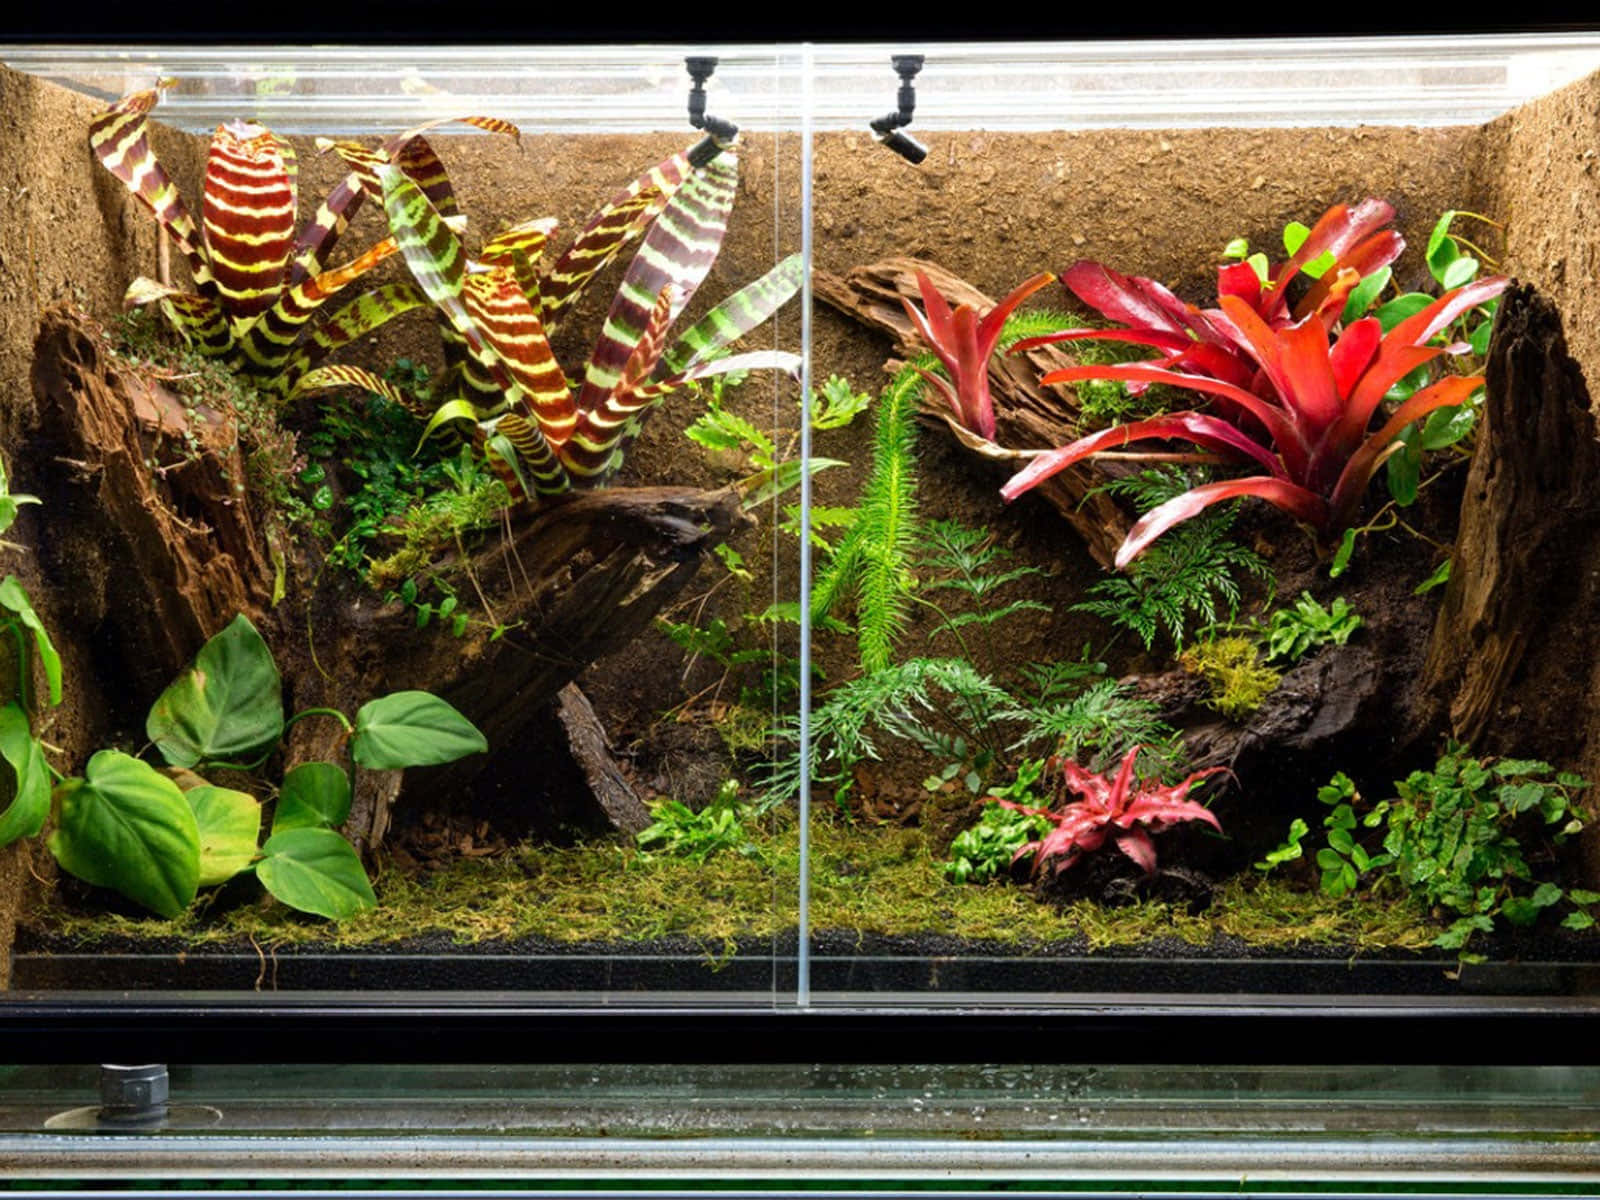 Enjoy nature - colorful reptiles living in their Reptile Tank.